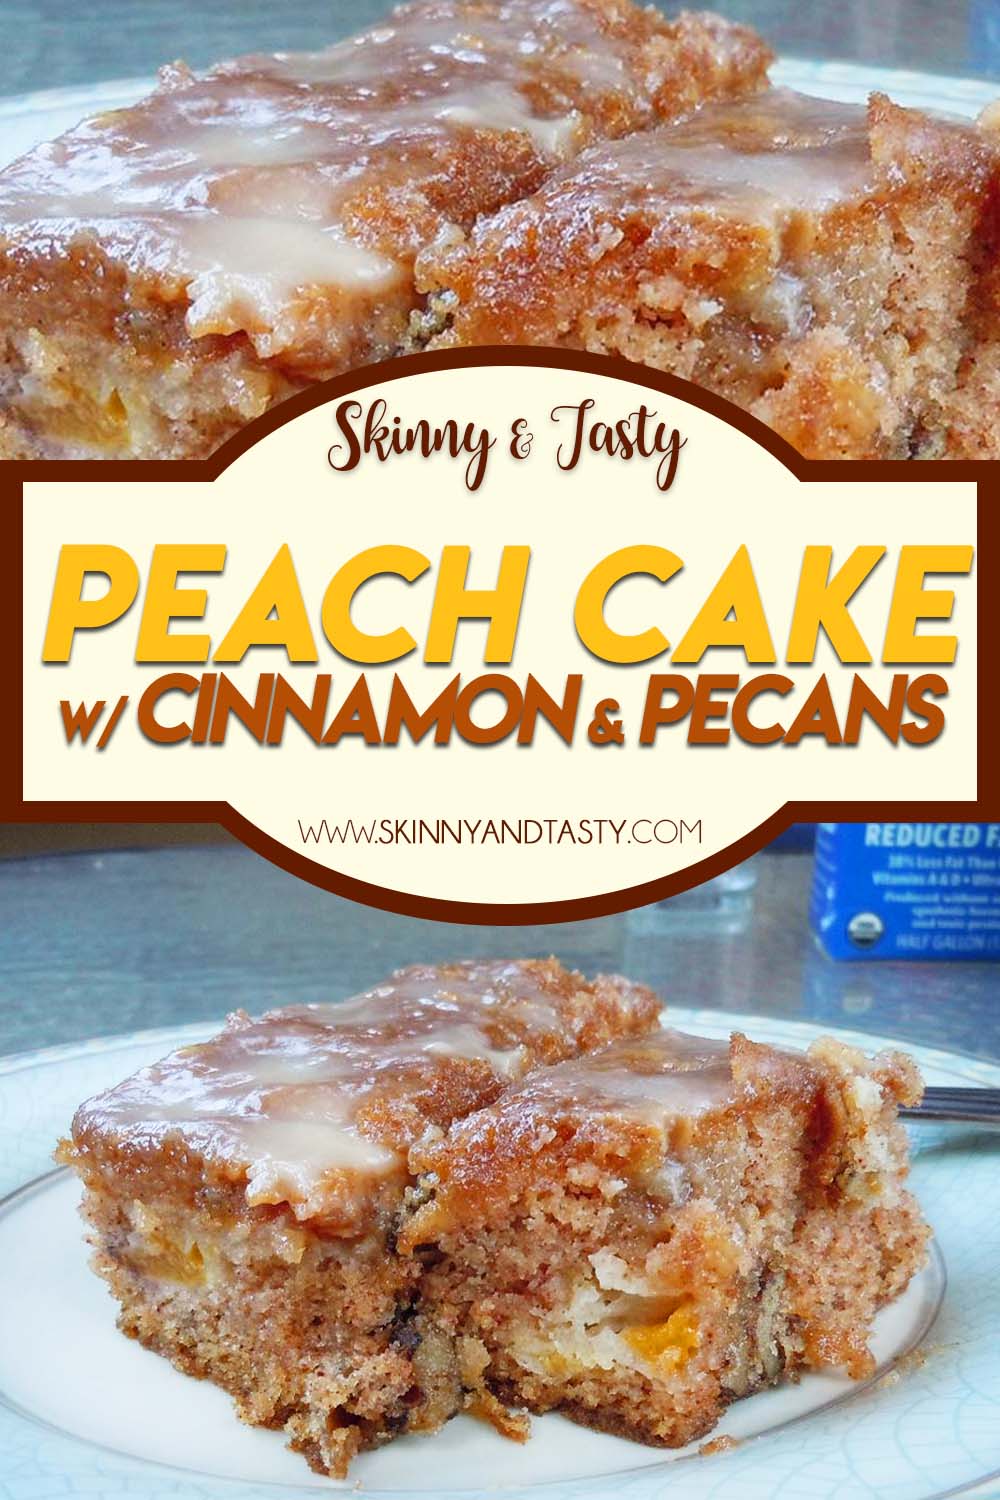 Peach Cake with Cinnamon and Pecans Recipe